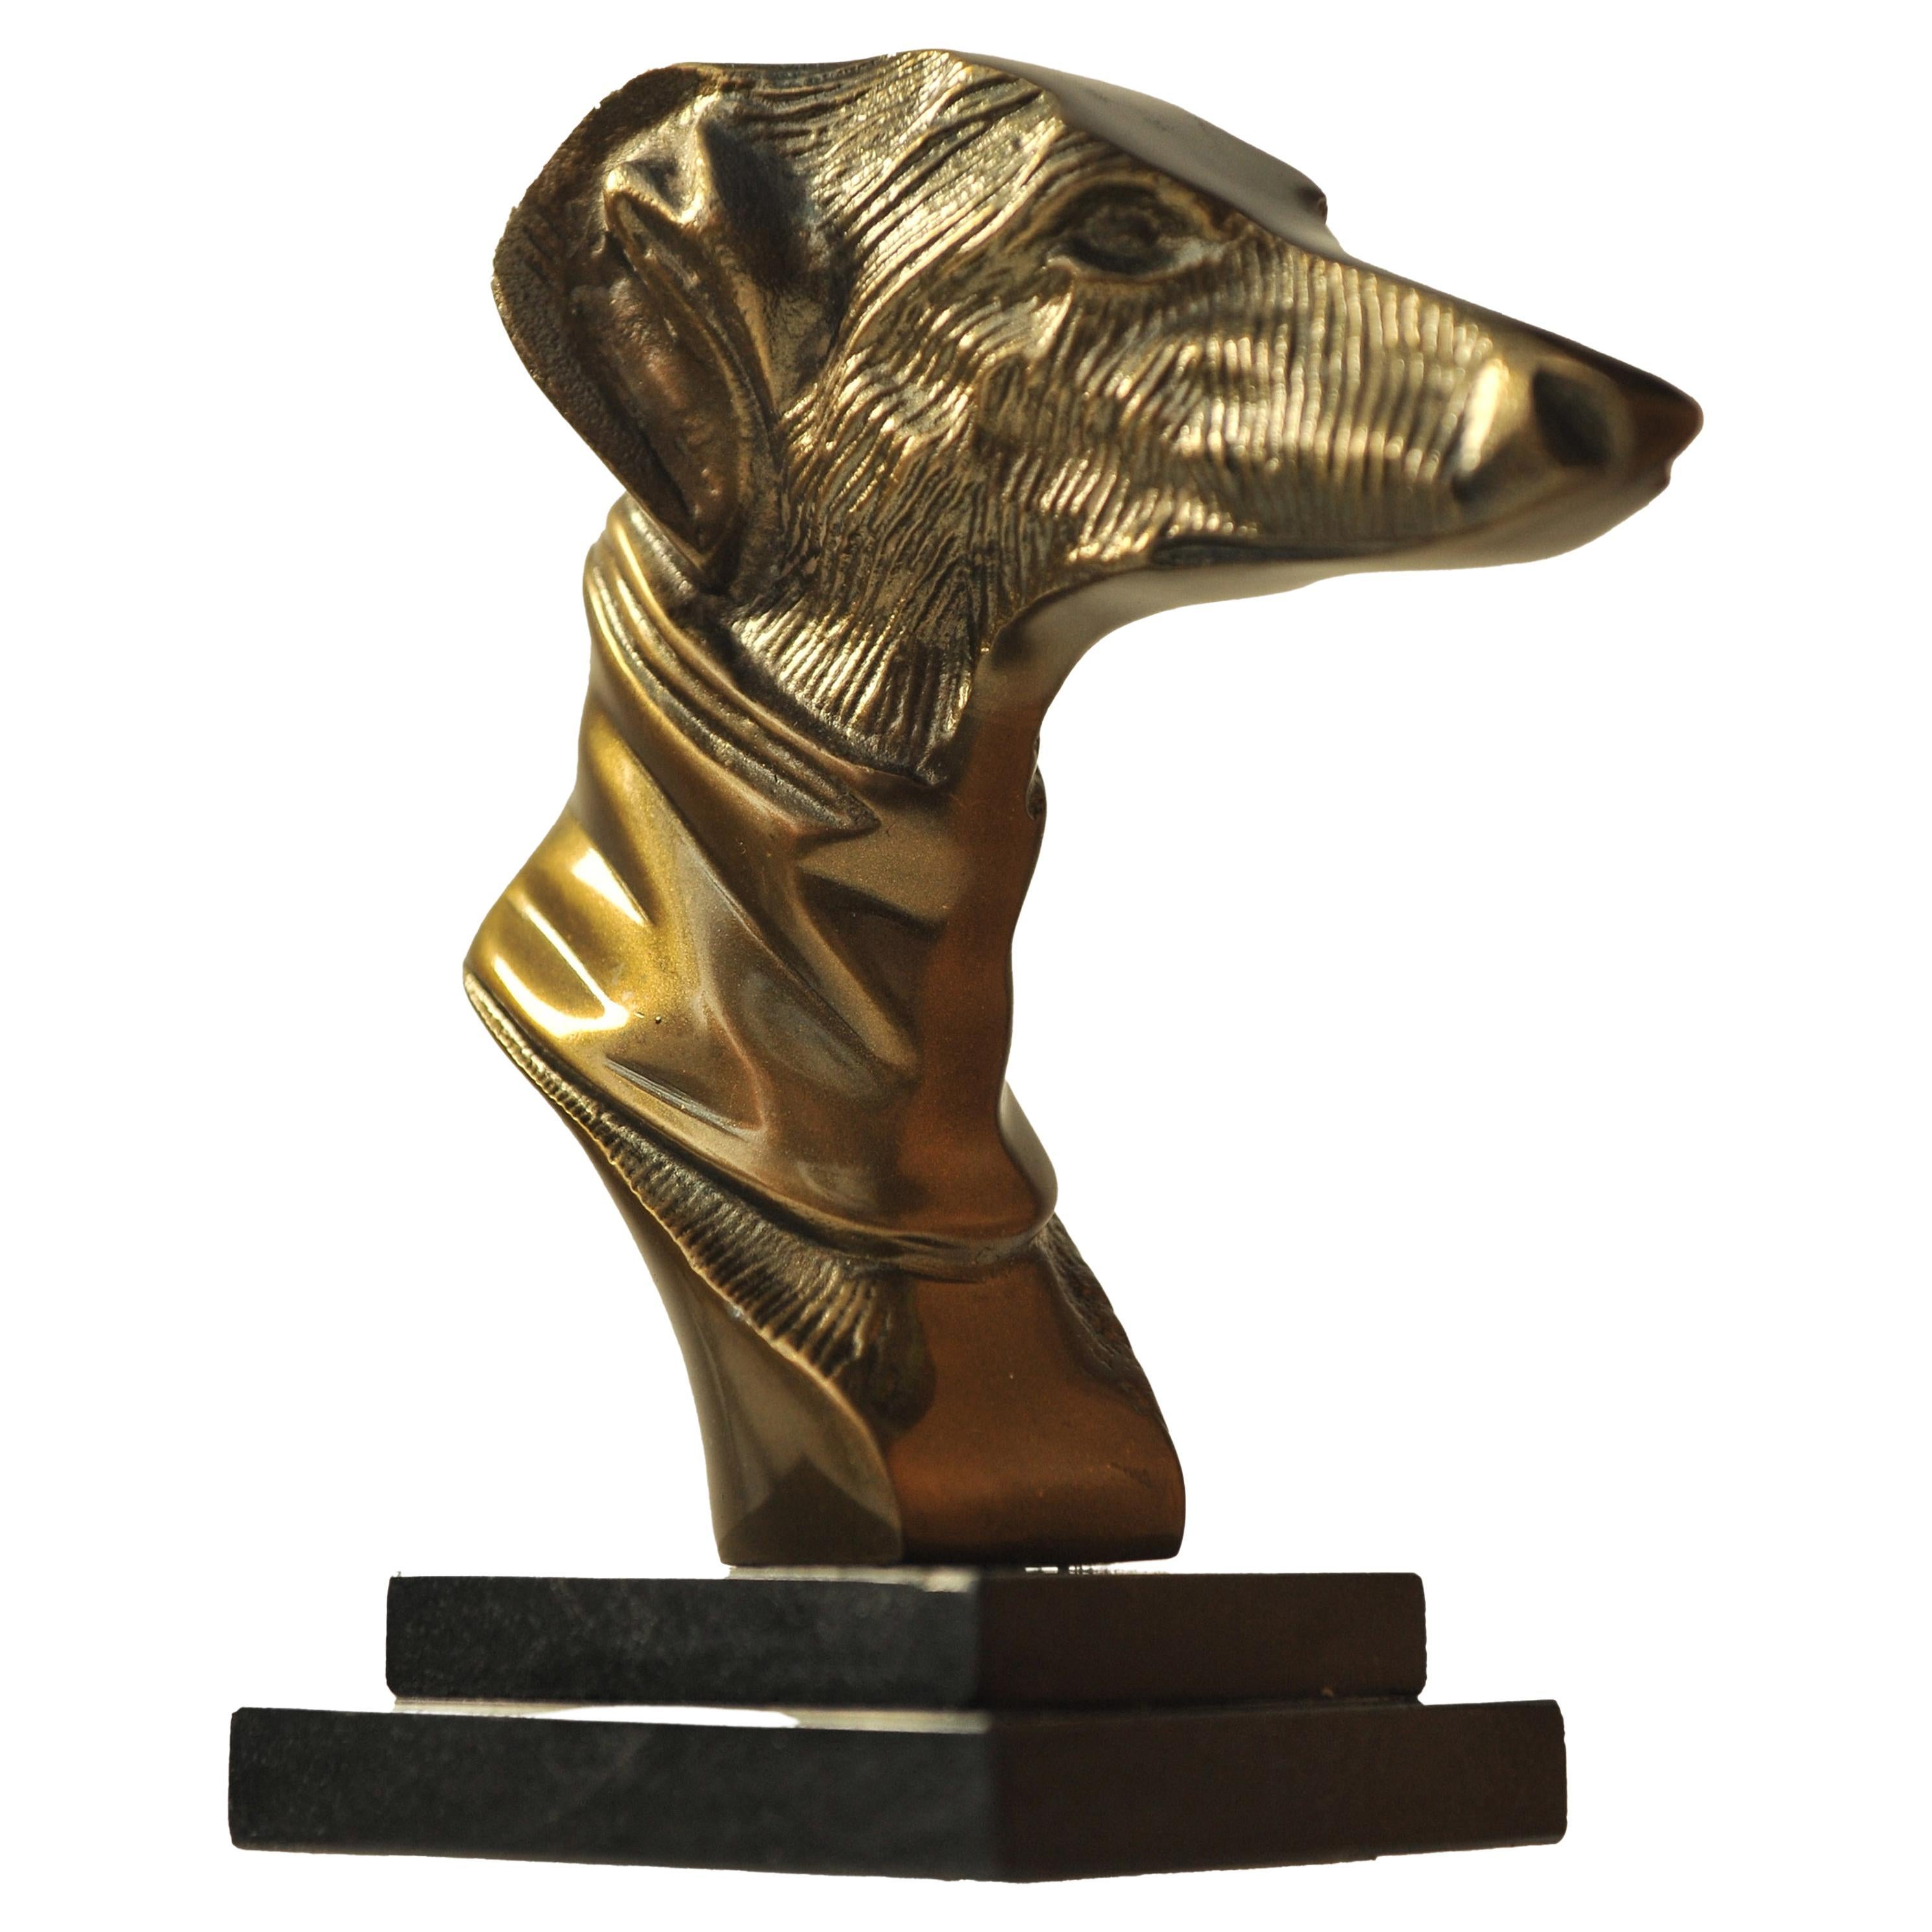 Greyhound Bronze Figurehead On Plinth Ideal For Desk Paperweight Or Decoration. For Sale